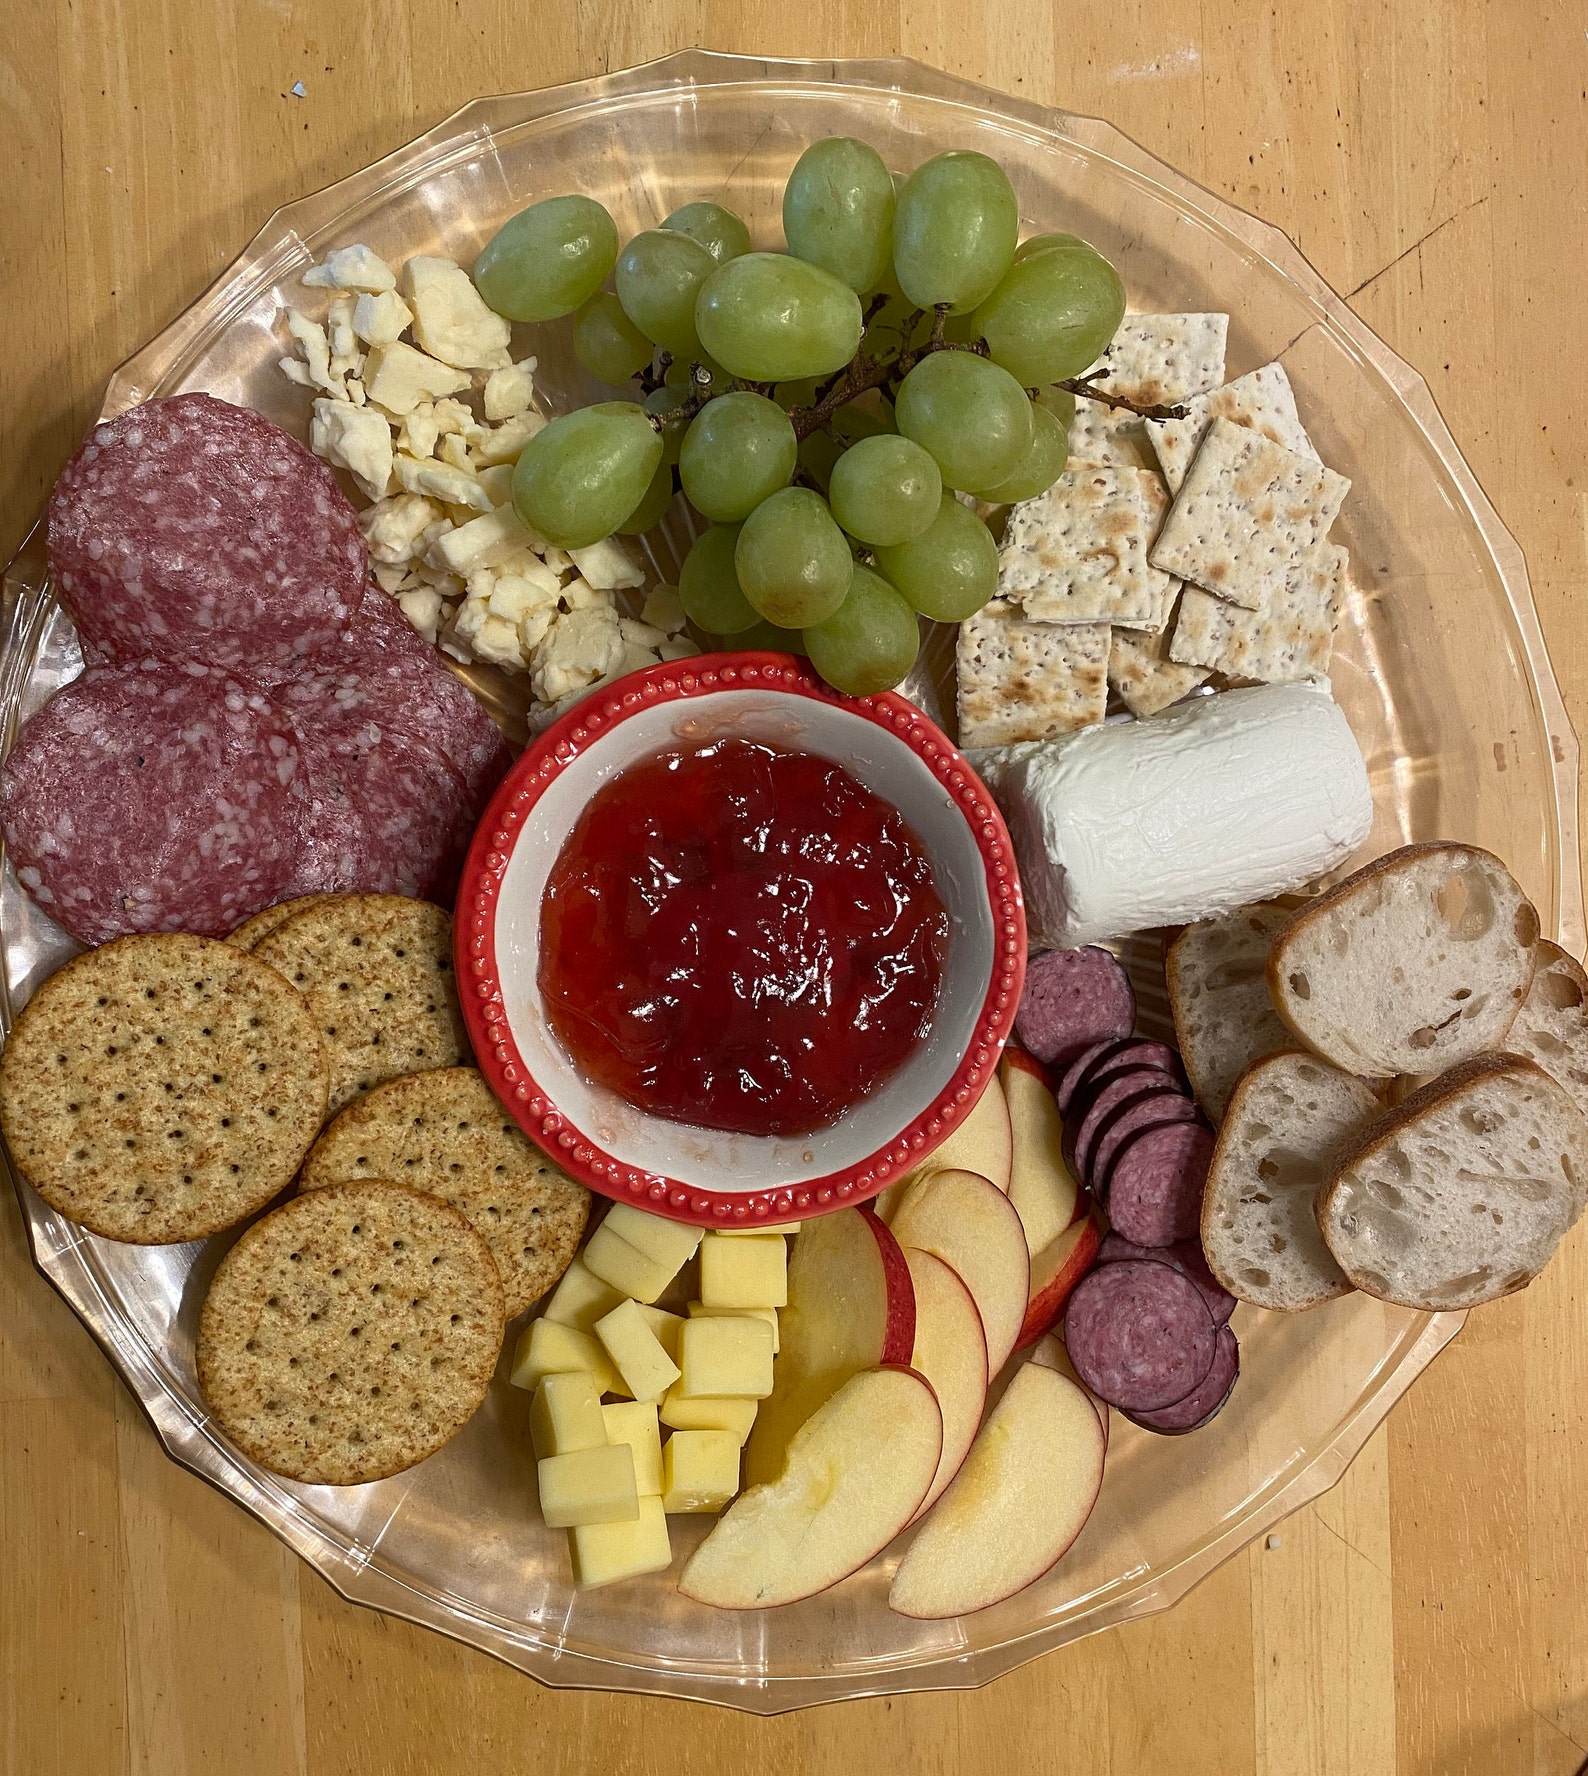 Charcuterie Board Layout Template